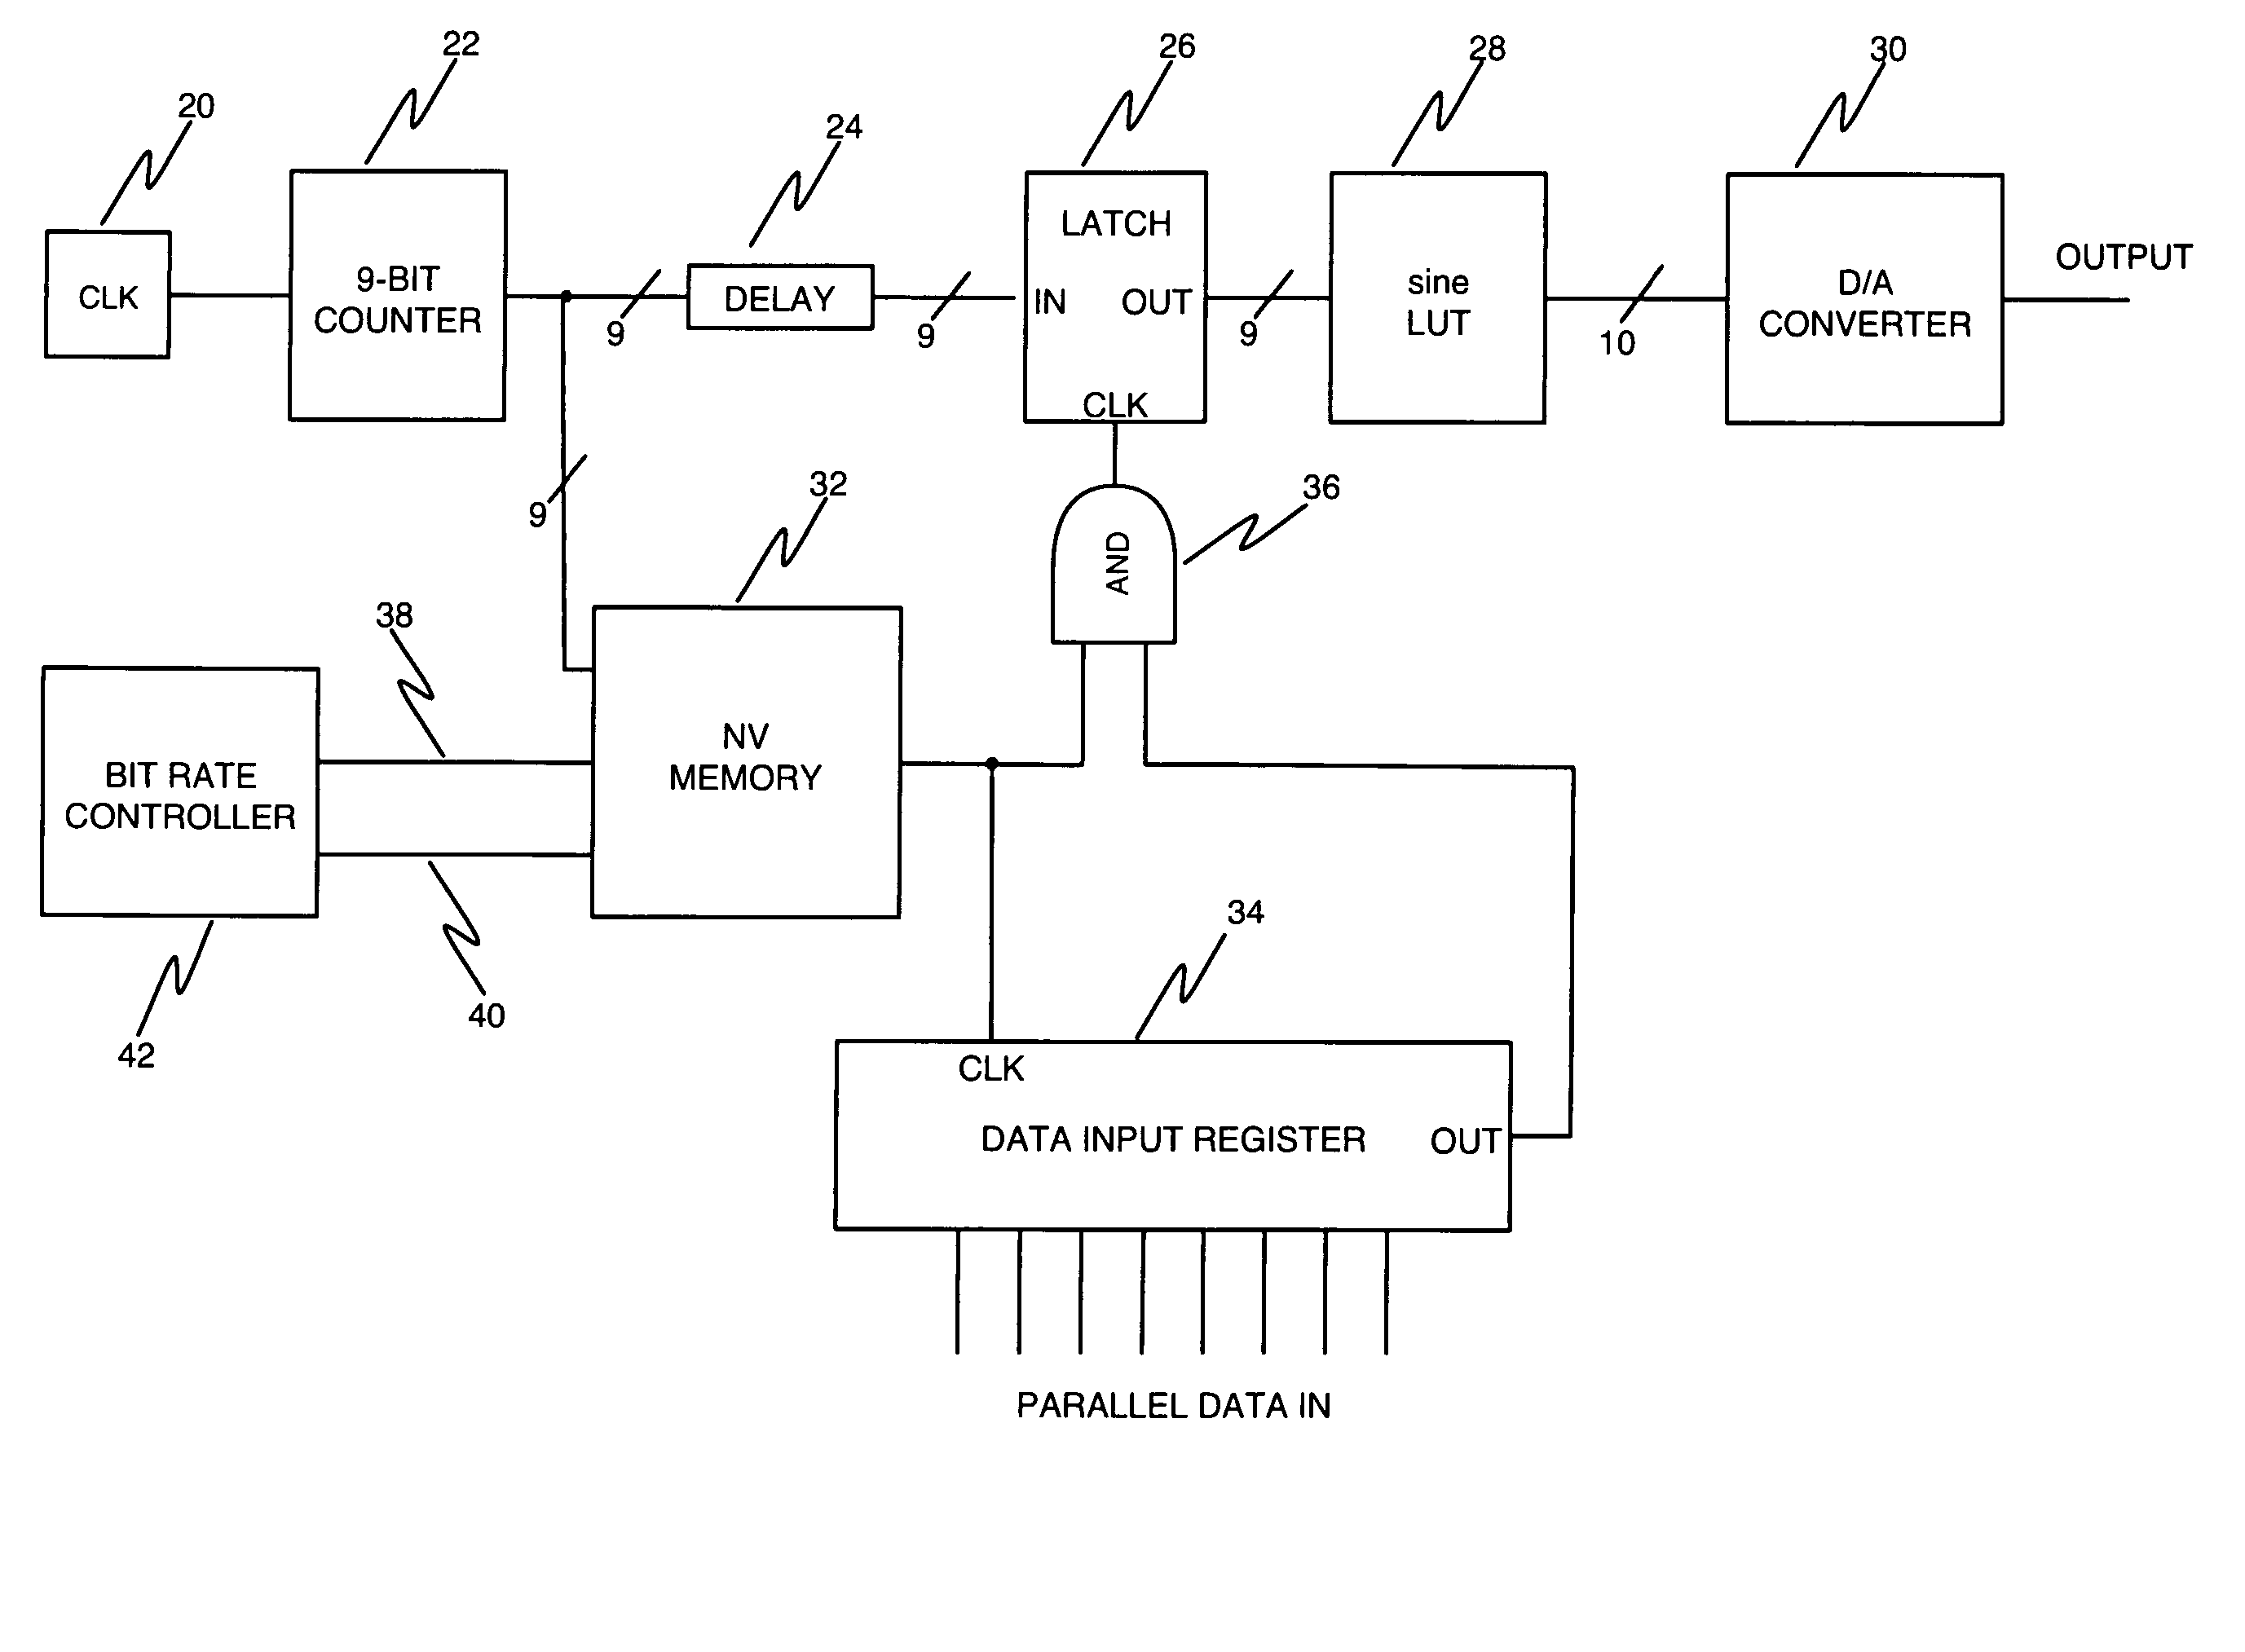 Coaxial cable communications systems and apparatus employing single and multiple sinewave modulation and demodulation techniques